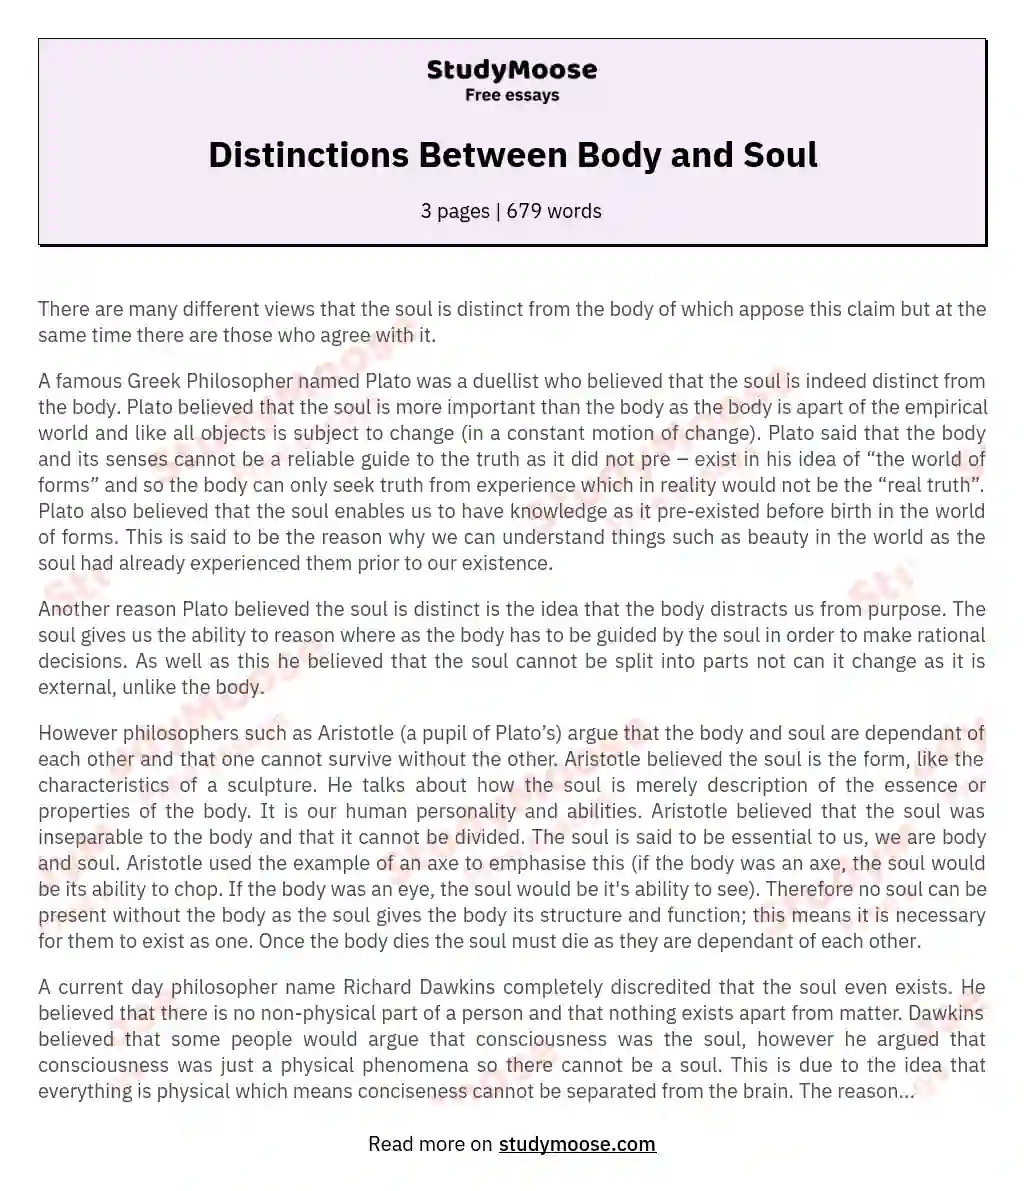 Distinctions Between Body and Soul